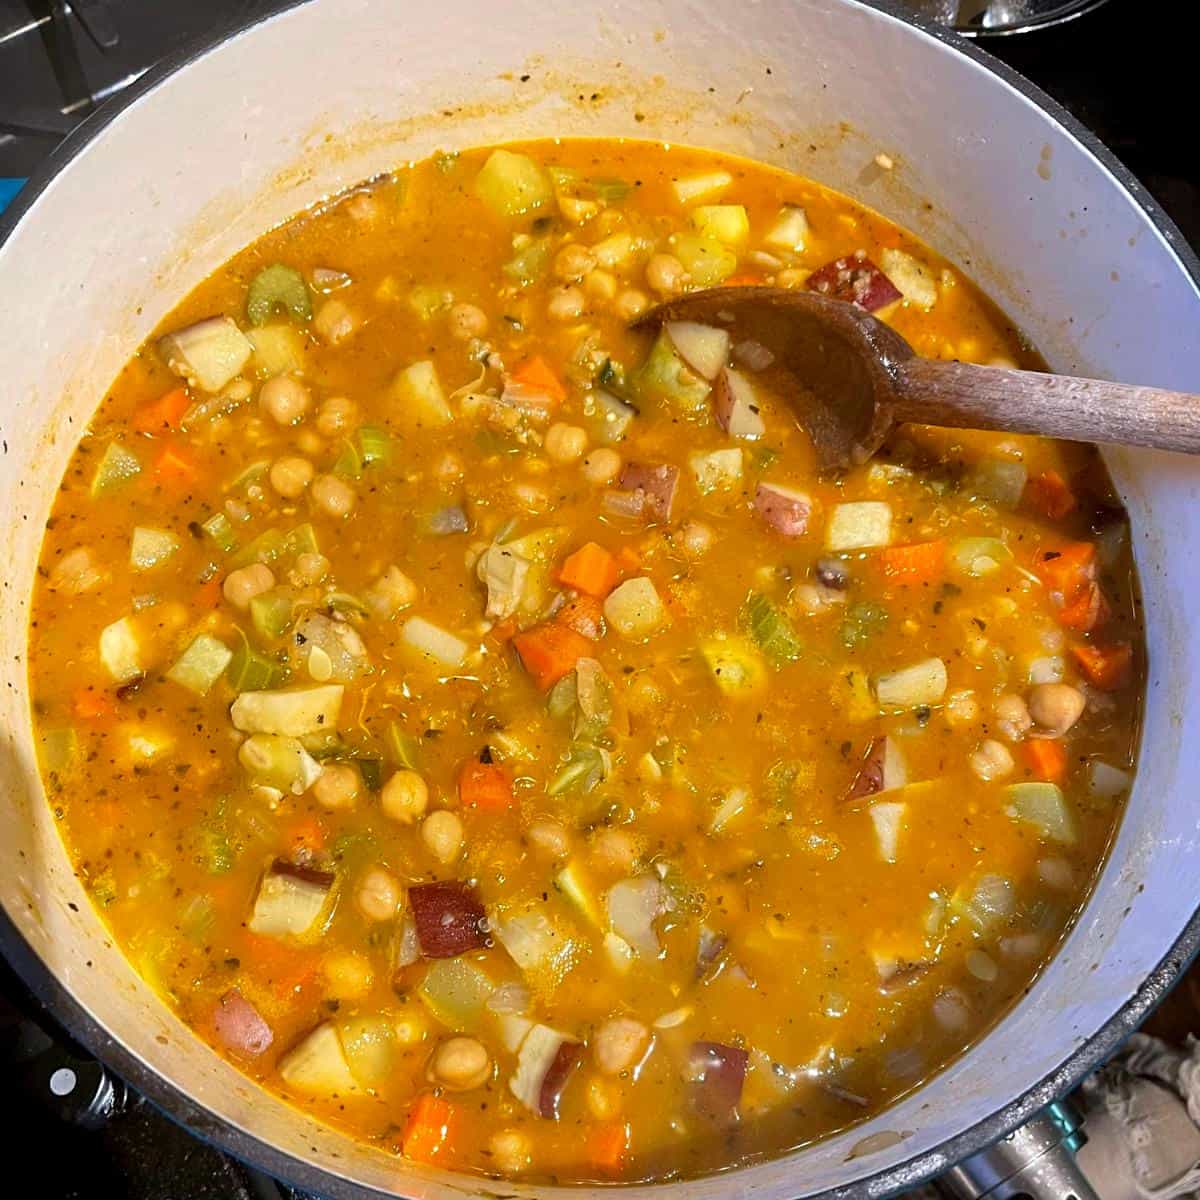 Calabrian chili paste and stock mixed into vegetable stew.